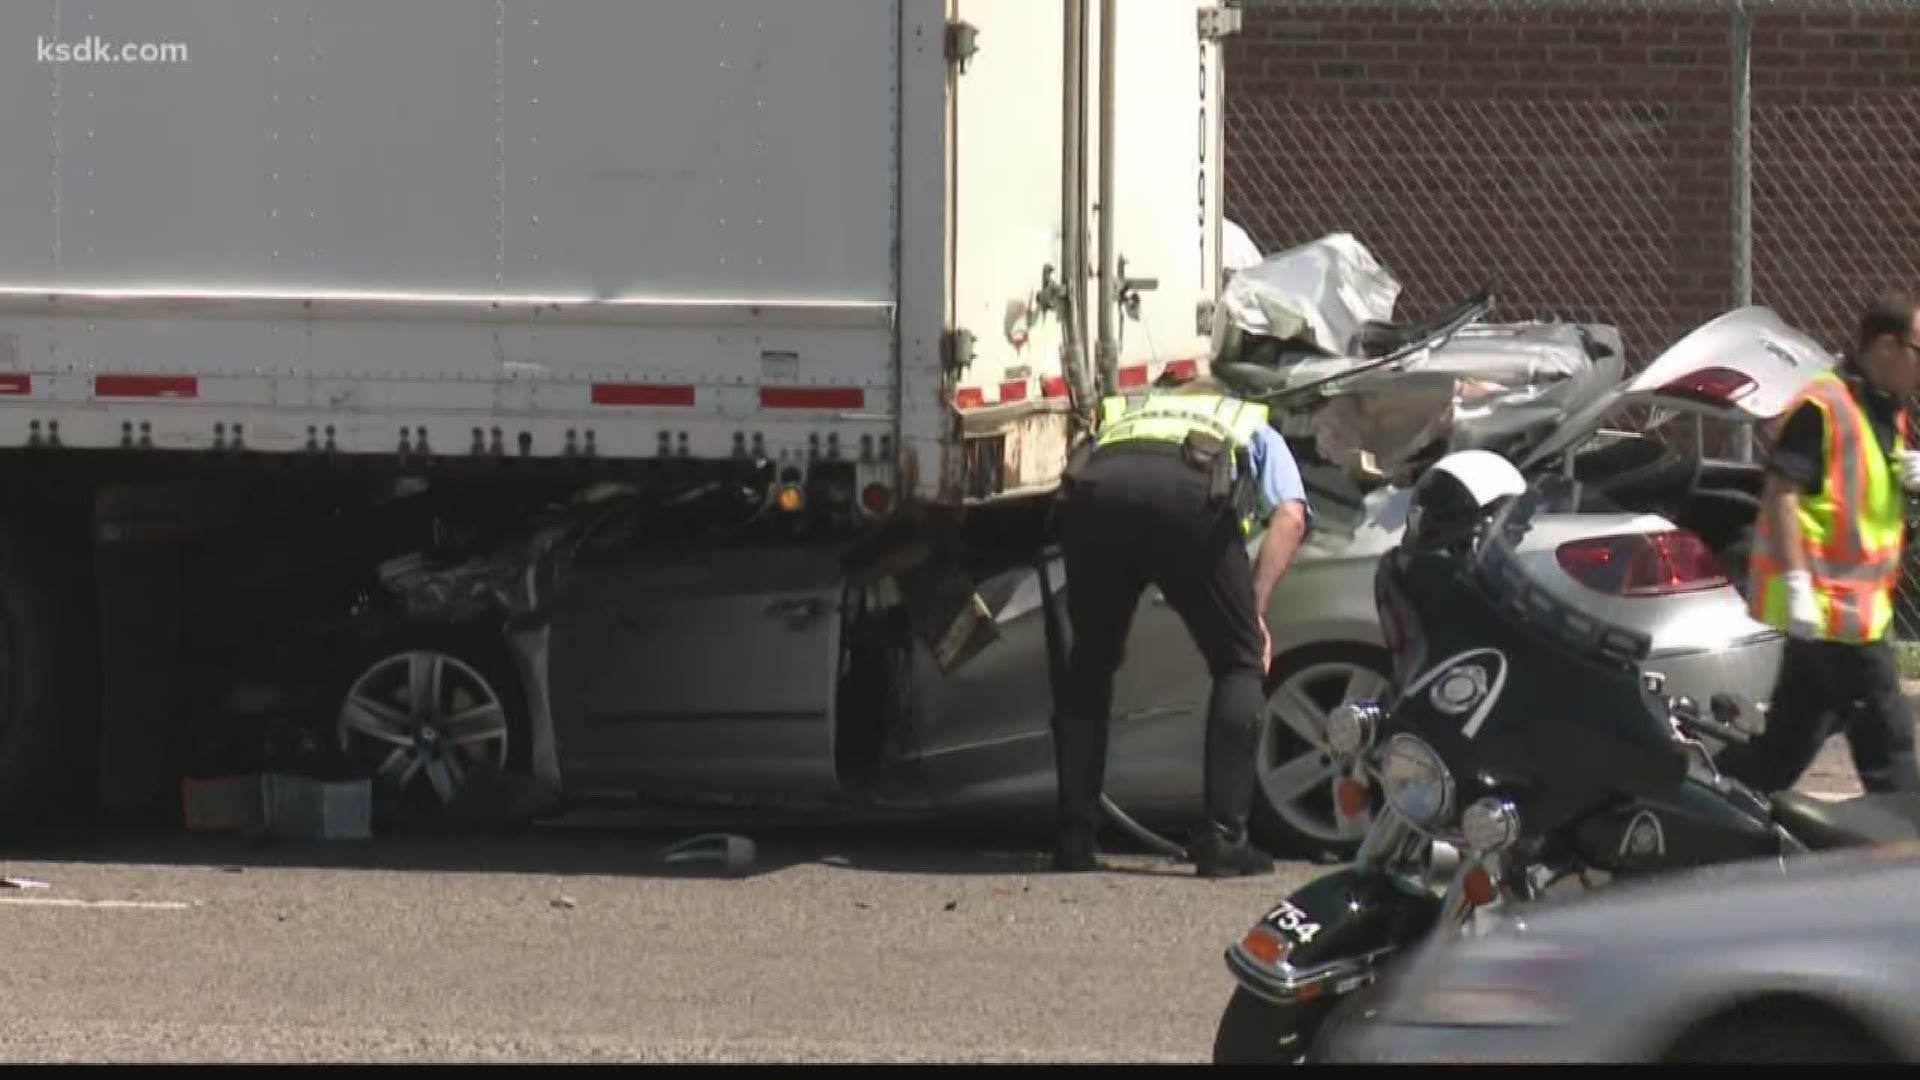 A passenger car crashed into the back of a tractor trailer. Two people inside the car were killed, according to St. Louis police.